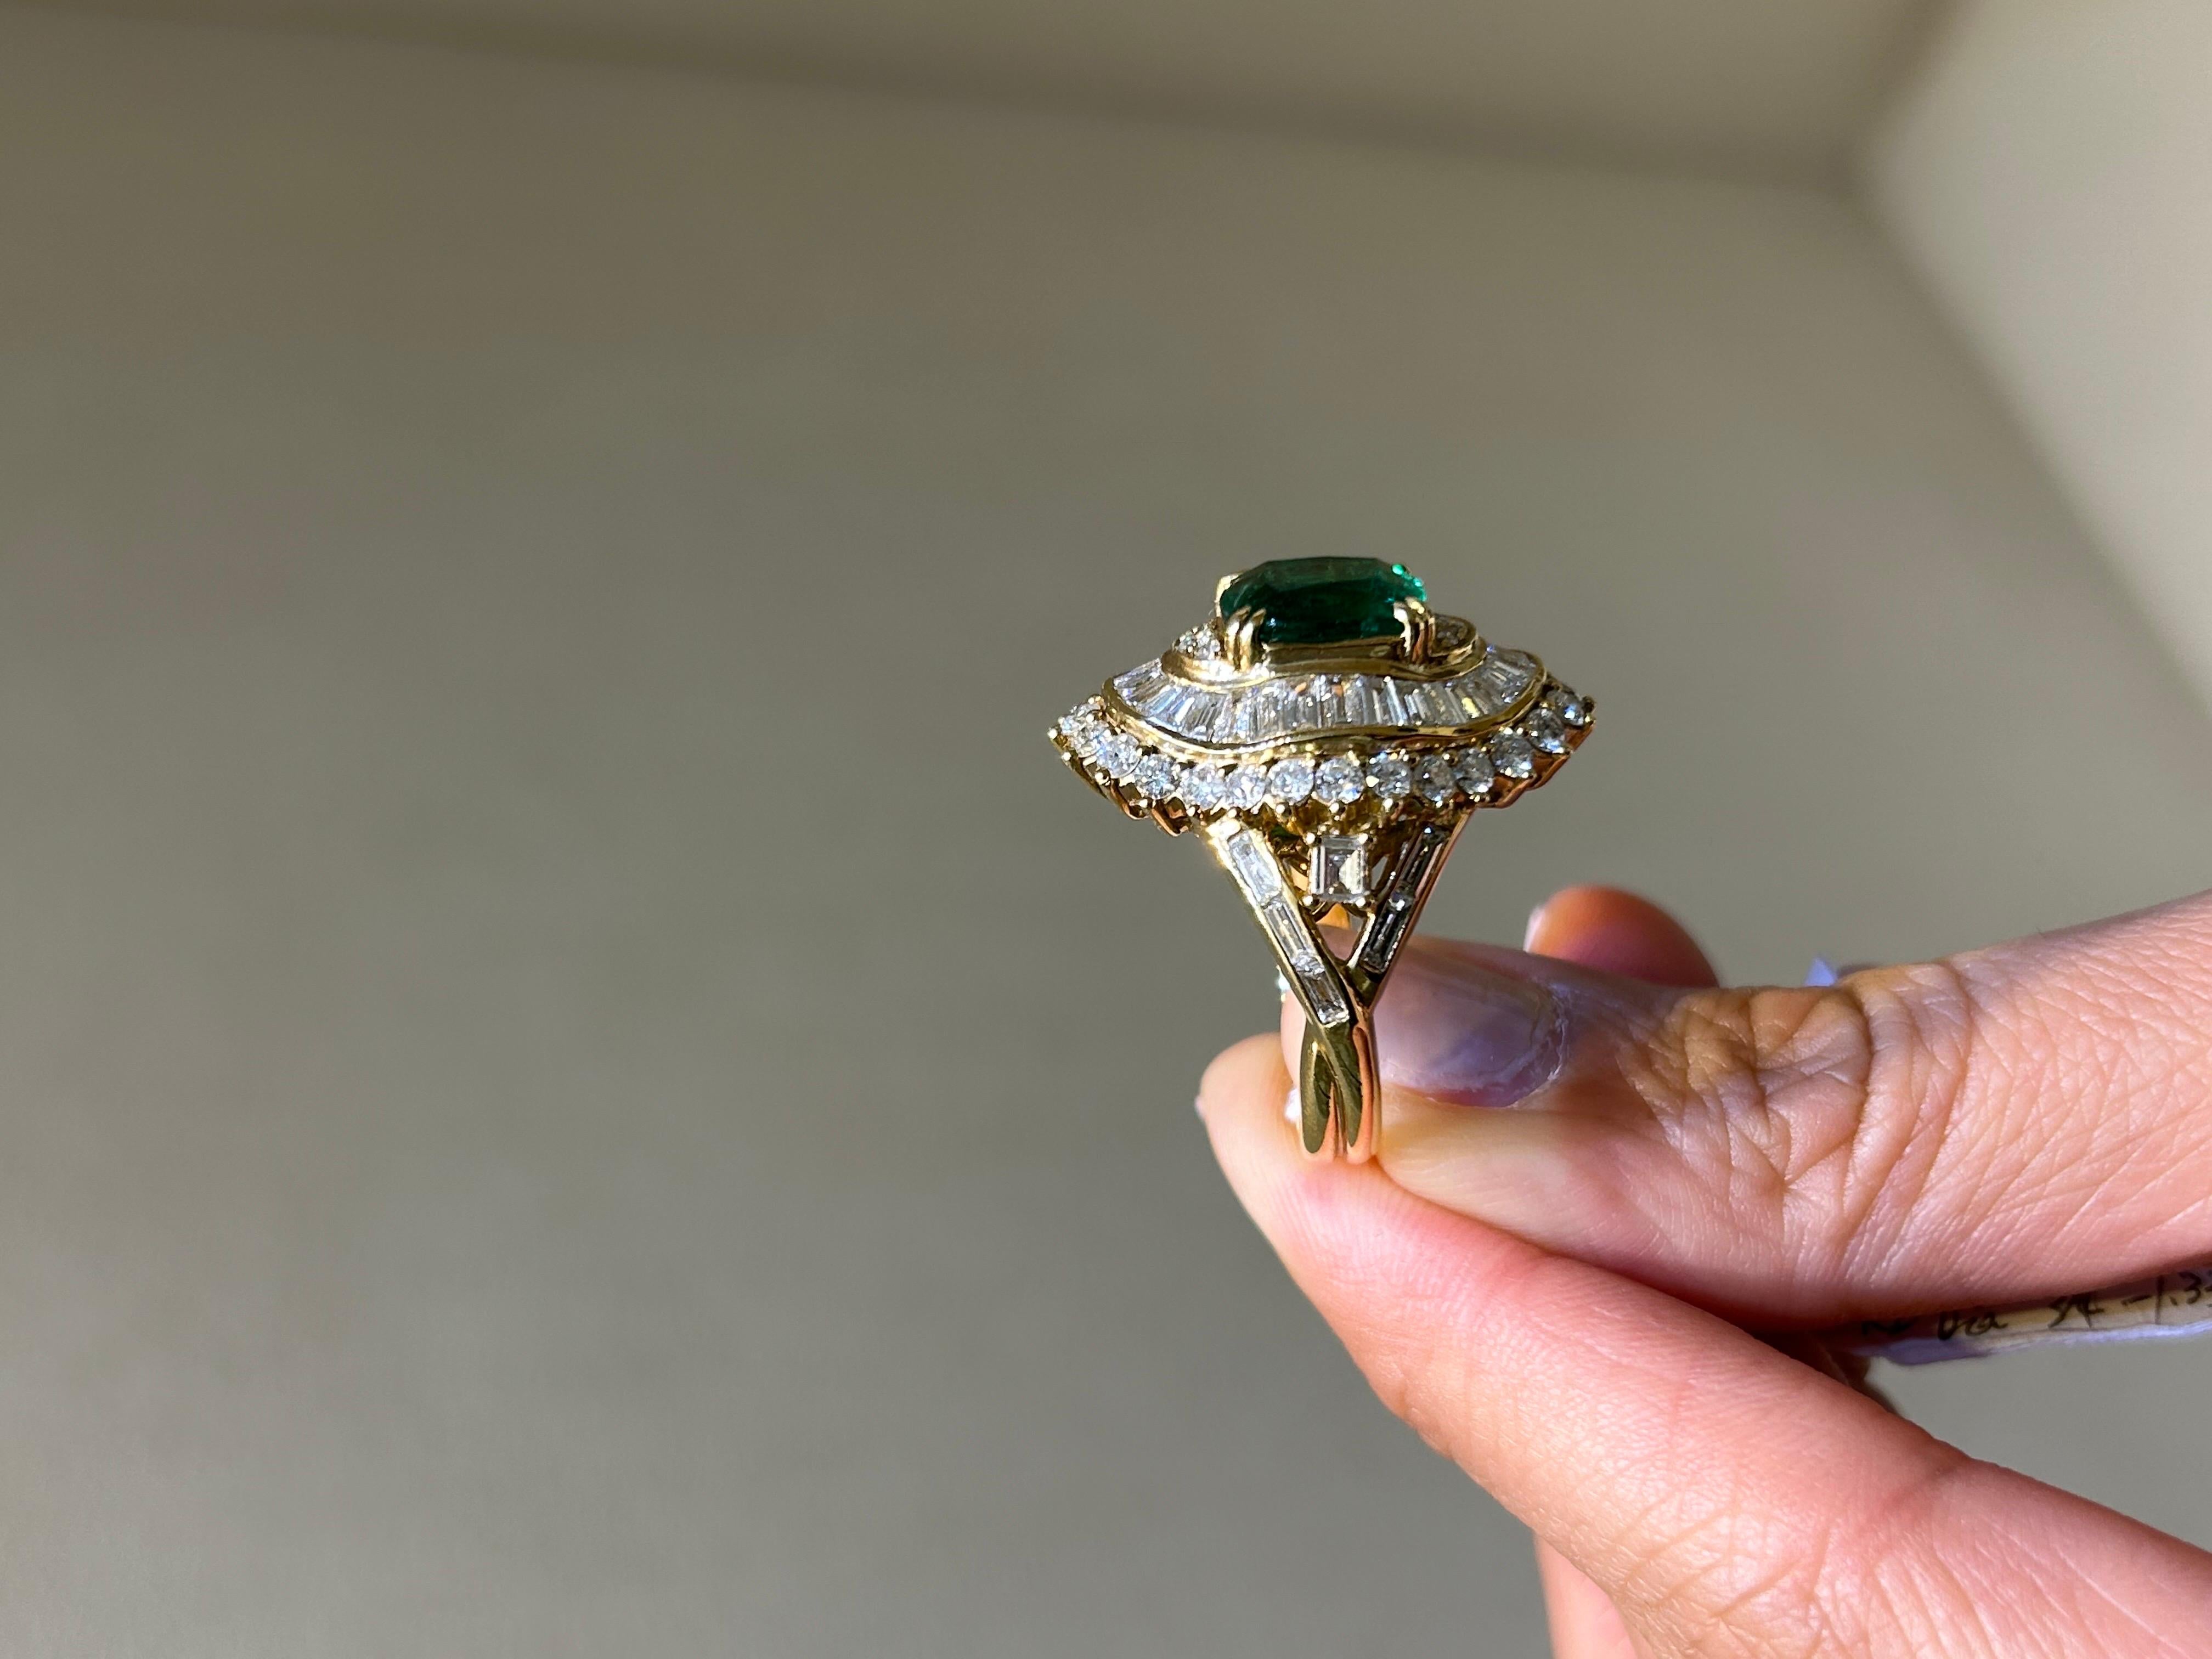 An antique, art-deco looking, 3.83 carat Zambian Emerald and 3.23 carat White Diamond cocktail ring, set in solid 18K Yellow Gold. The ring is made is Switzerland. Currently sized at US8, can be resized. 
We provide free shipping, and accept